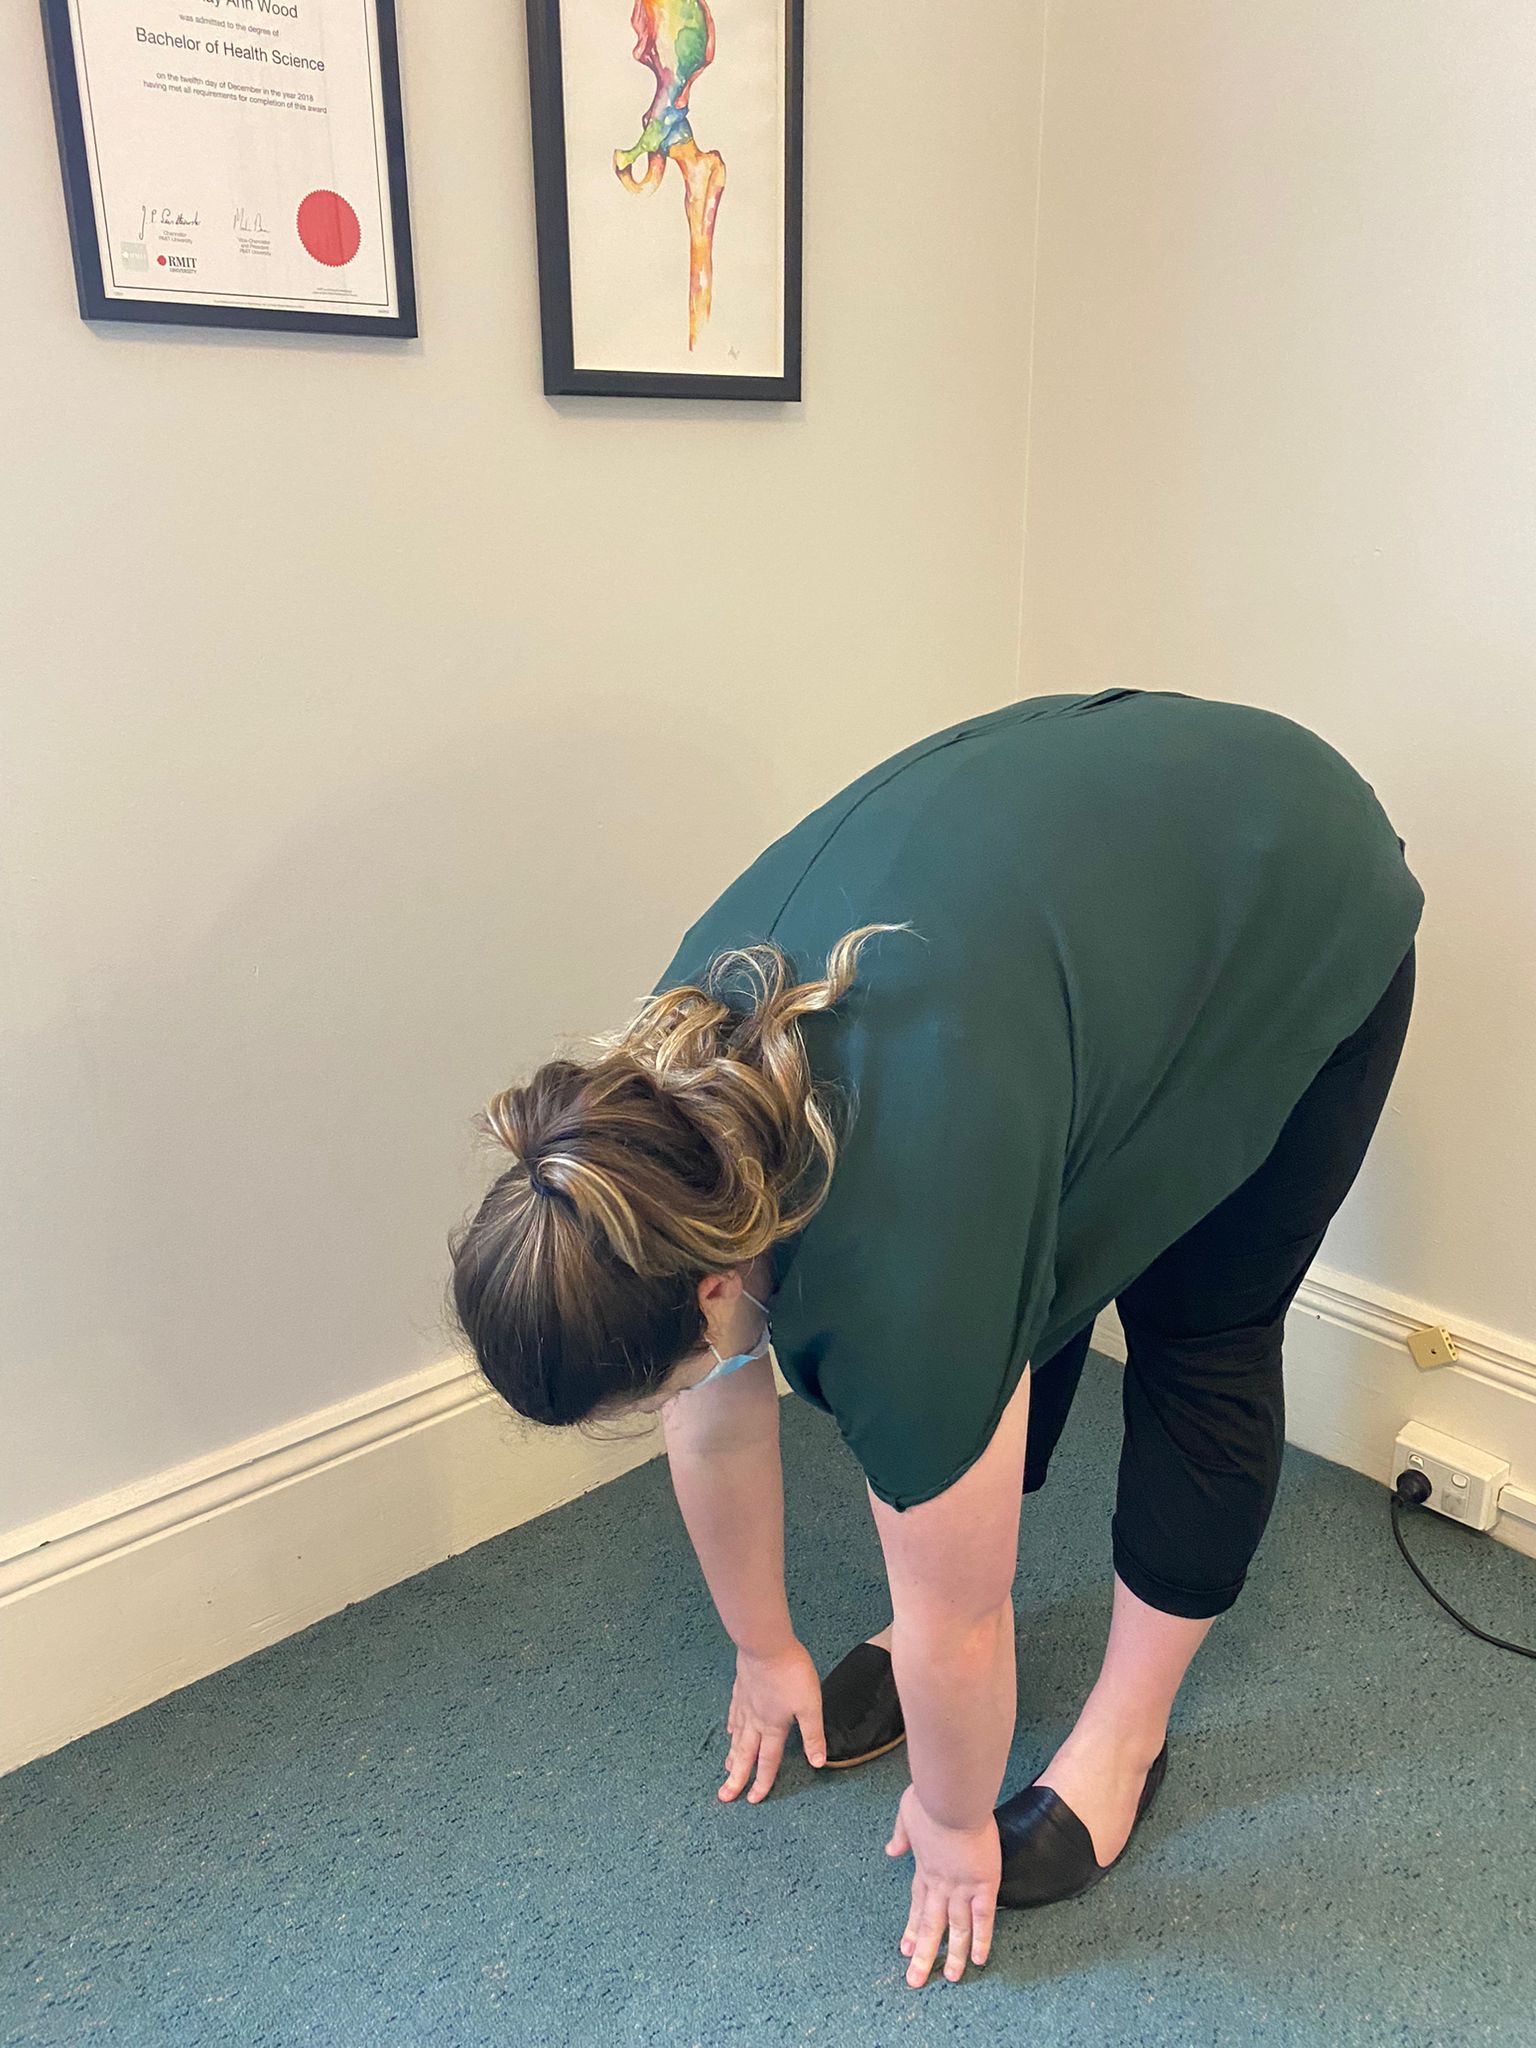 Beighton score hypermobility resilient health osteopath chiropractor